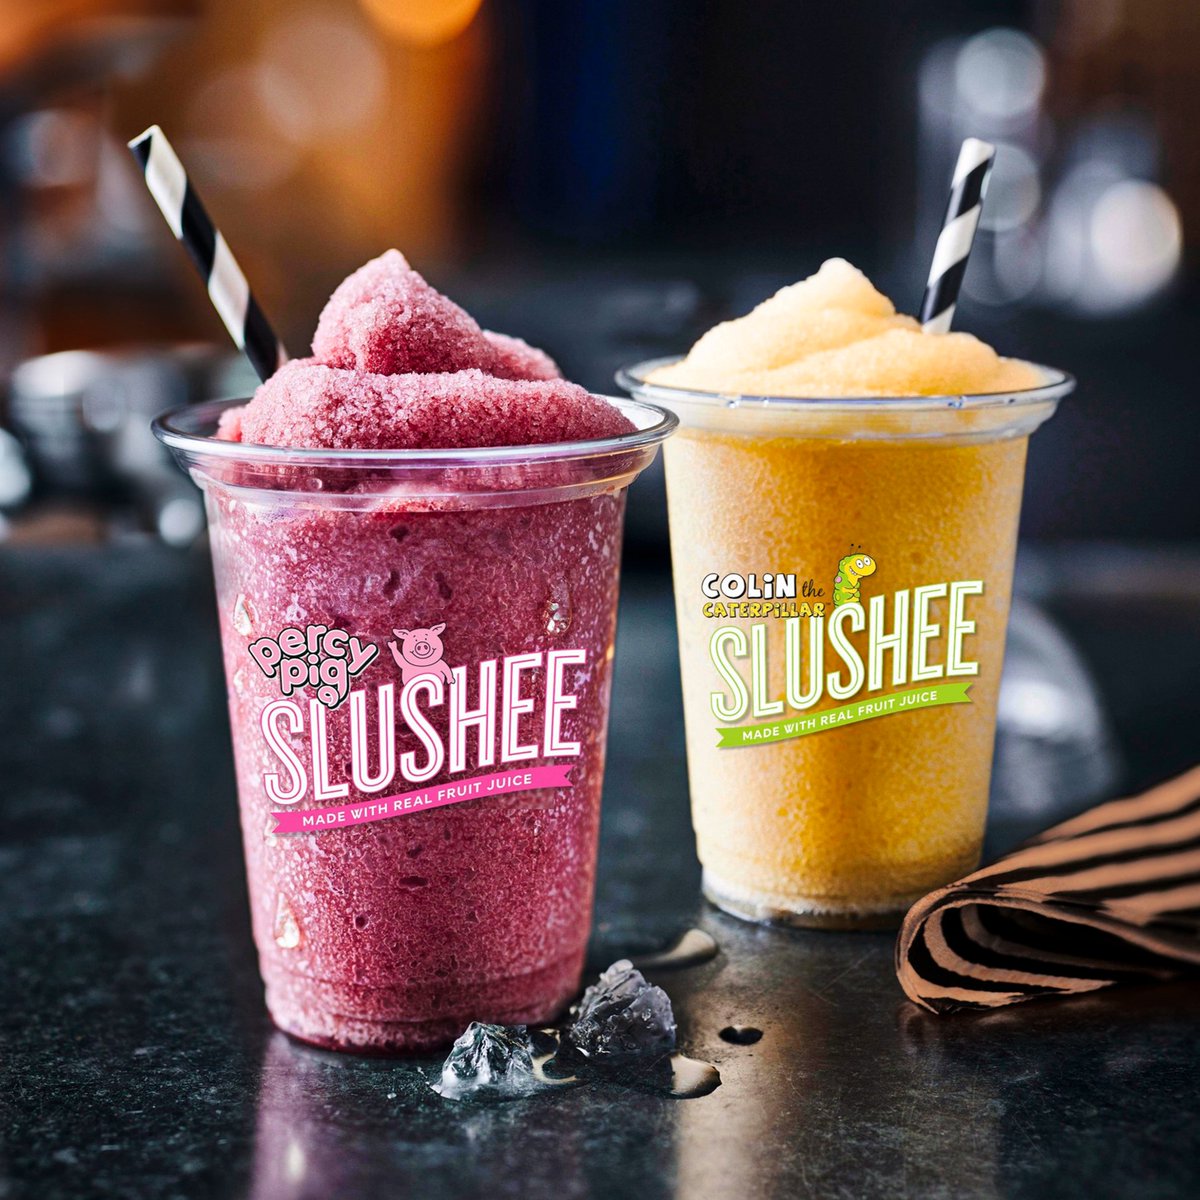 Our new Percy Pig and Colin the Caterpillar slushees launch in the M&S Café today! 👏 Our delicious Percy slushee is a blend of grape, raspberry and apple juice 🍇 and our Colin slushee is a cloudy apple juice, both churned until frozen, plus they're both certified Eat Well. 🌻